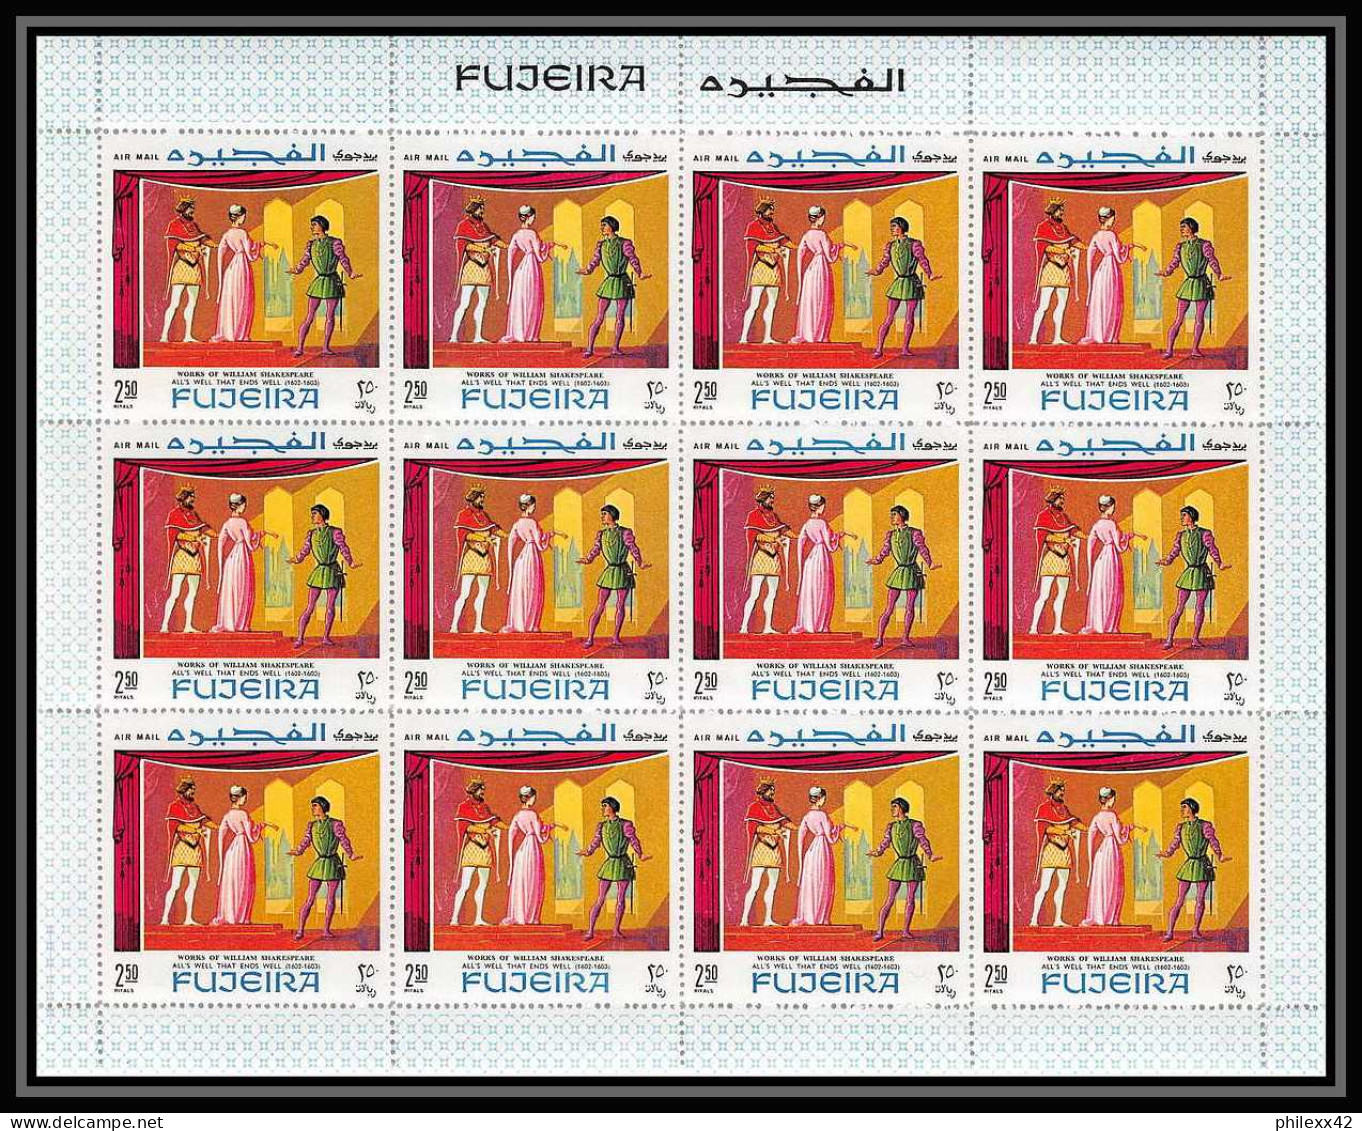 036a - Fujeira mi N°311/319 A scenes from Shakespeare theatre feuille complete (sheet) MNH **